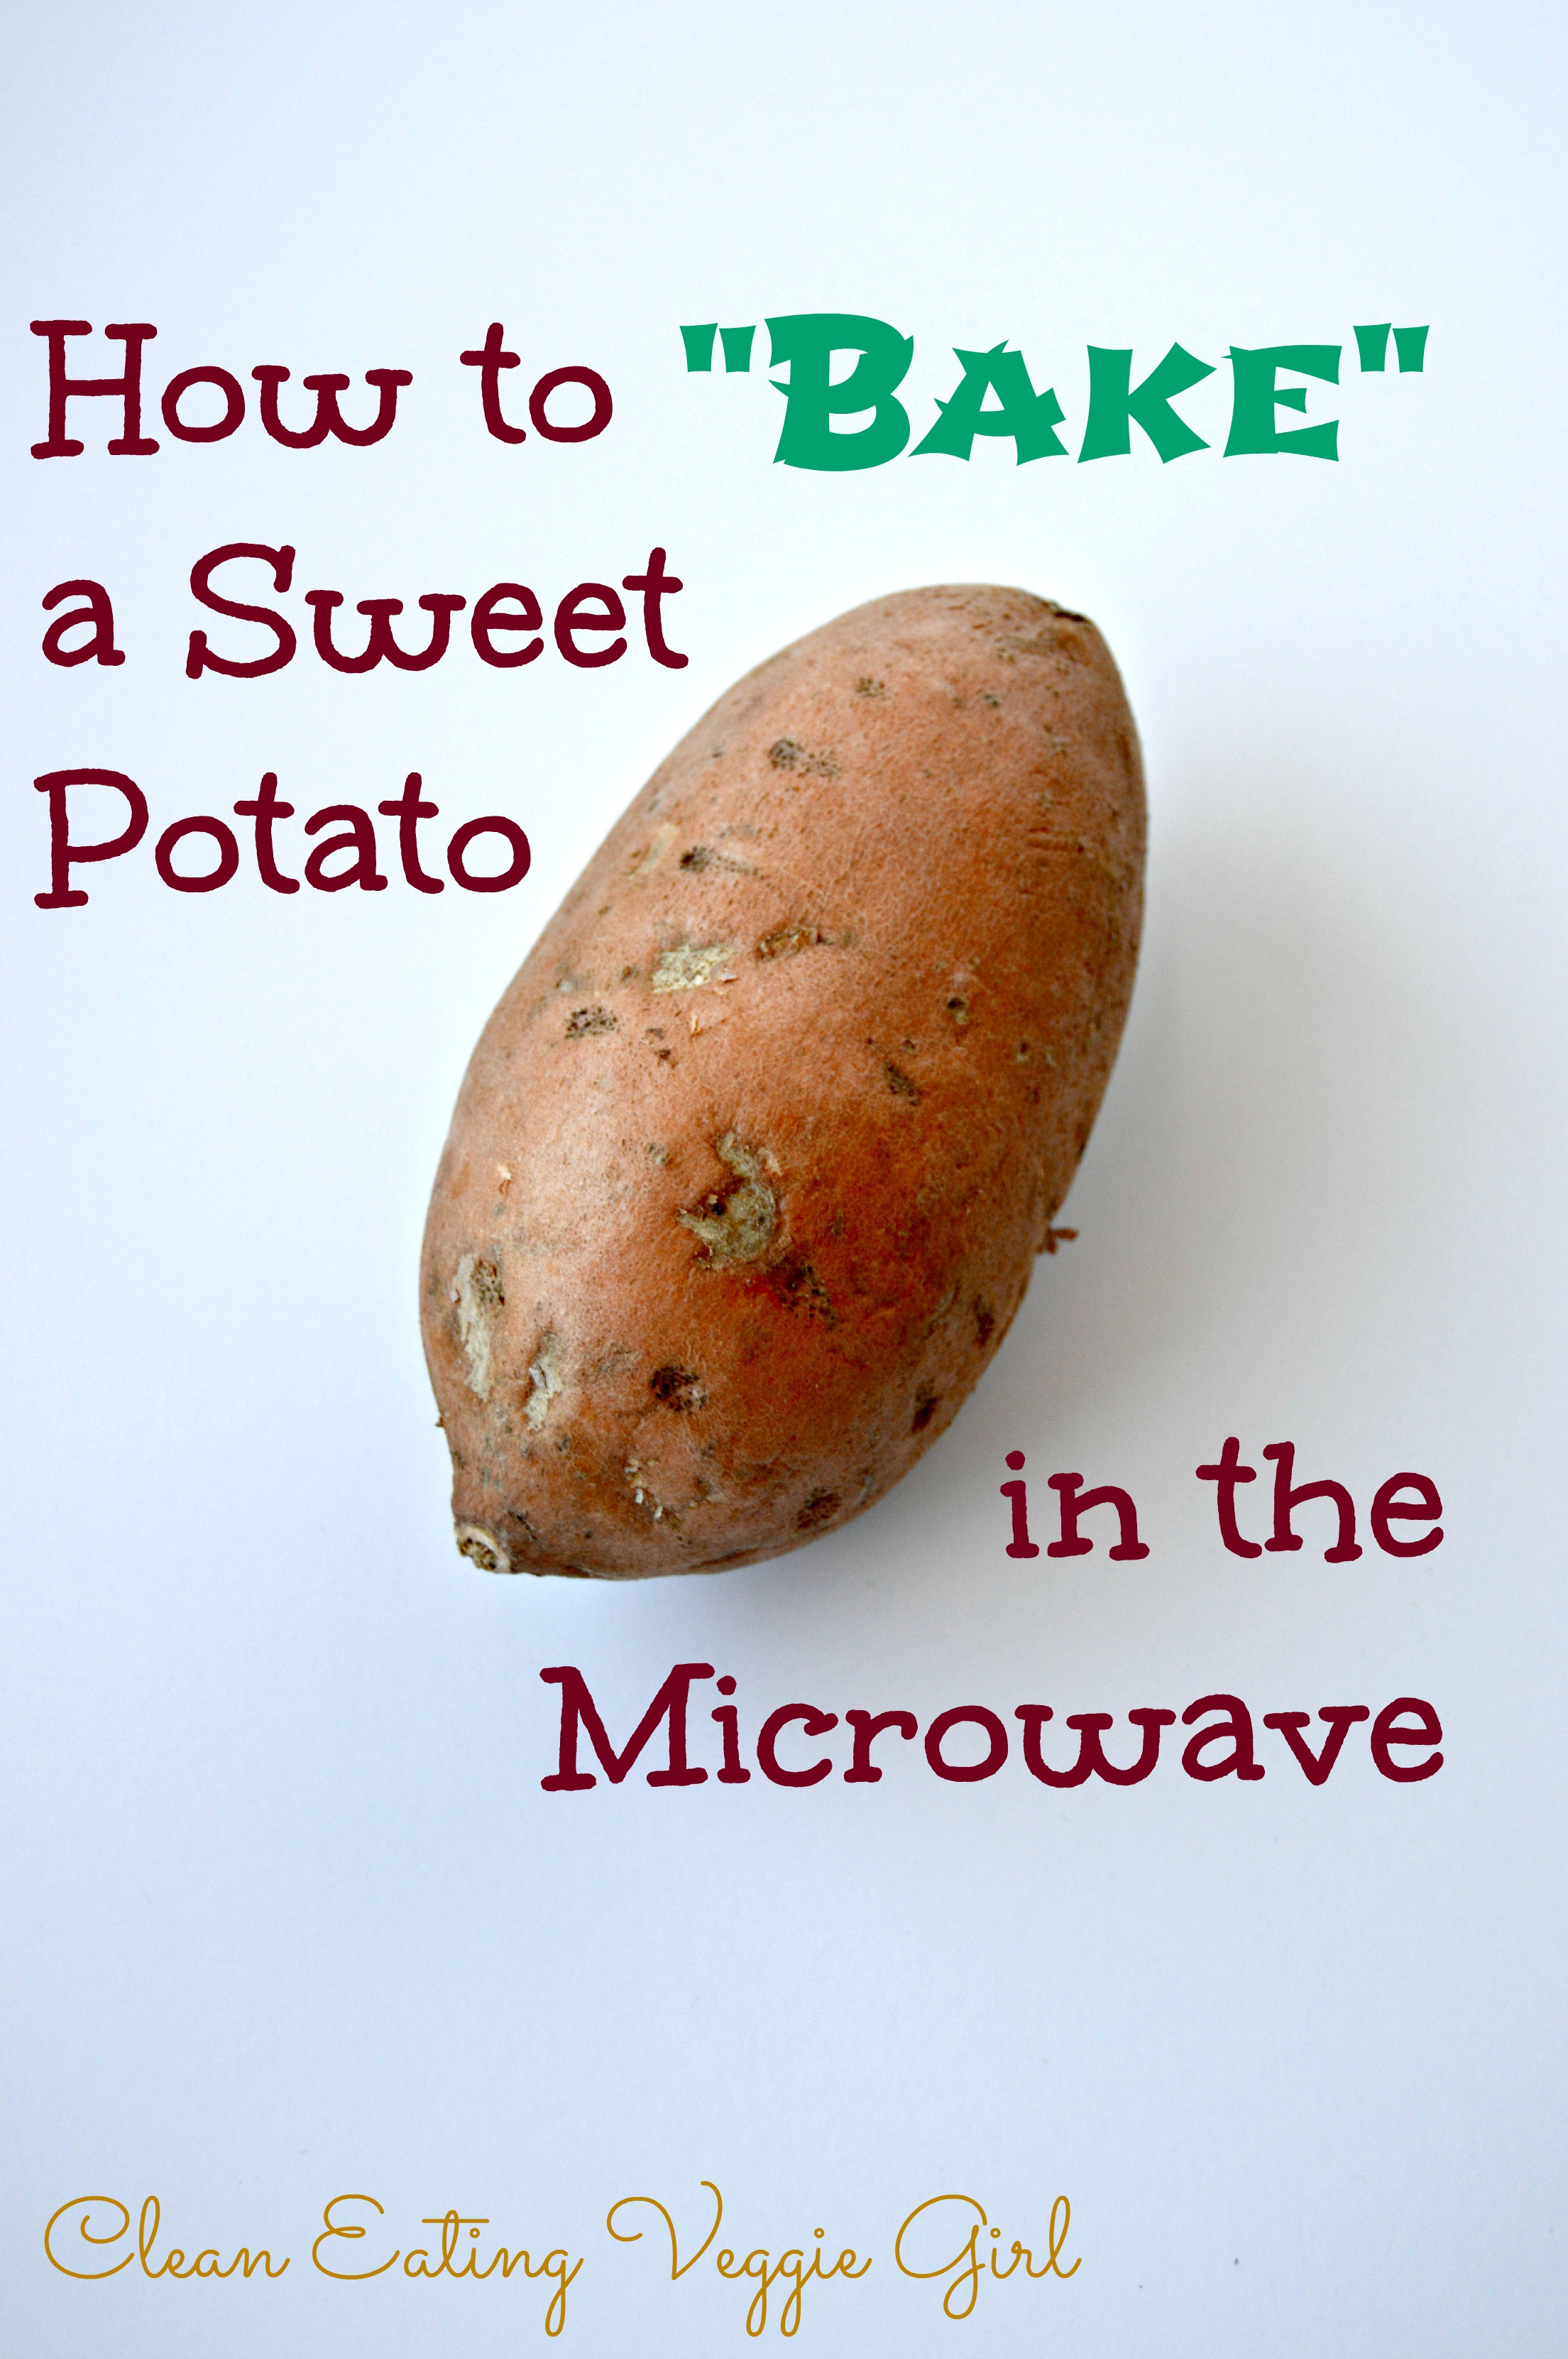 How Long To Microwave Baked Potato
 How to Make a Baked Sweet Potato in the Microwave Clean